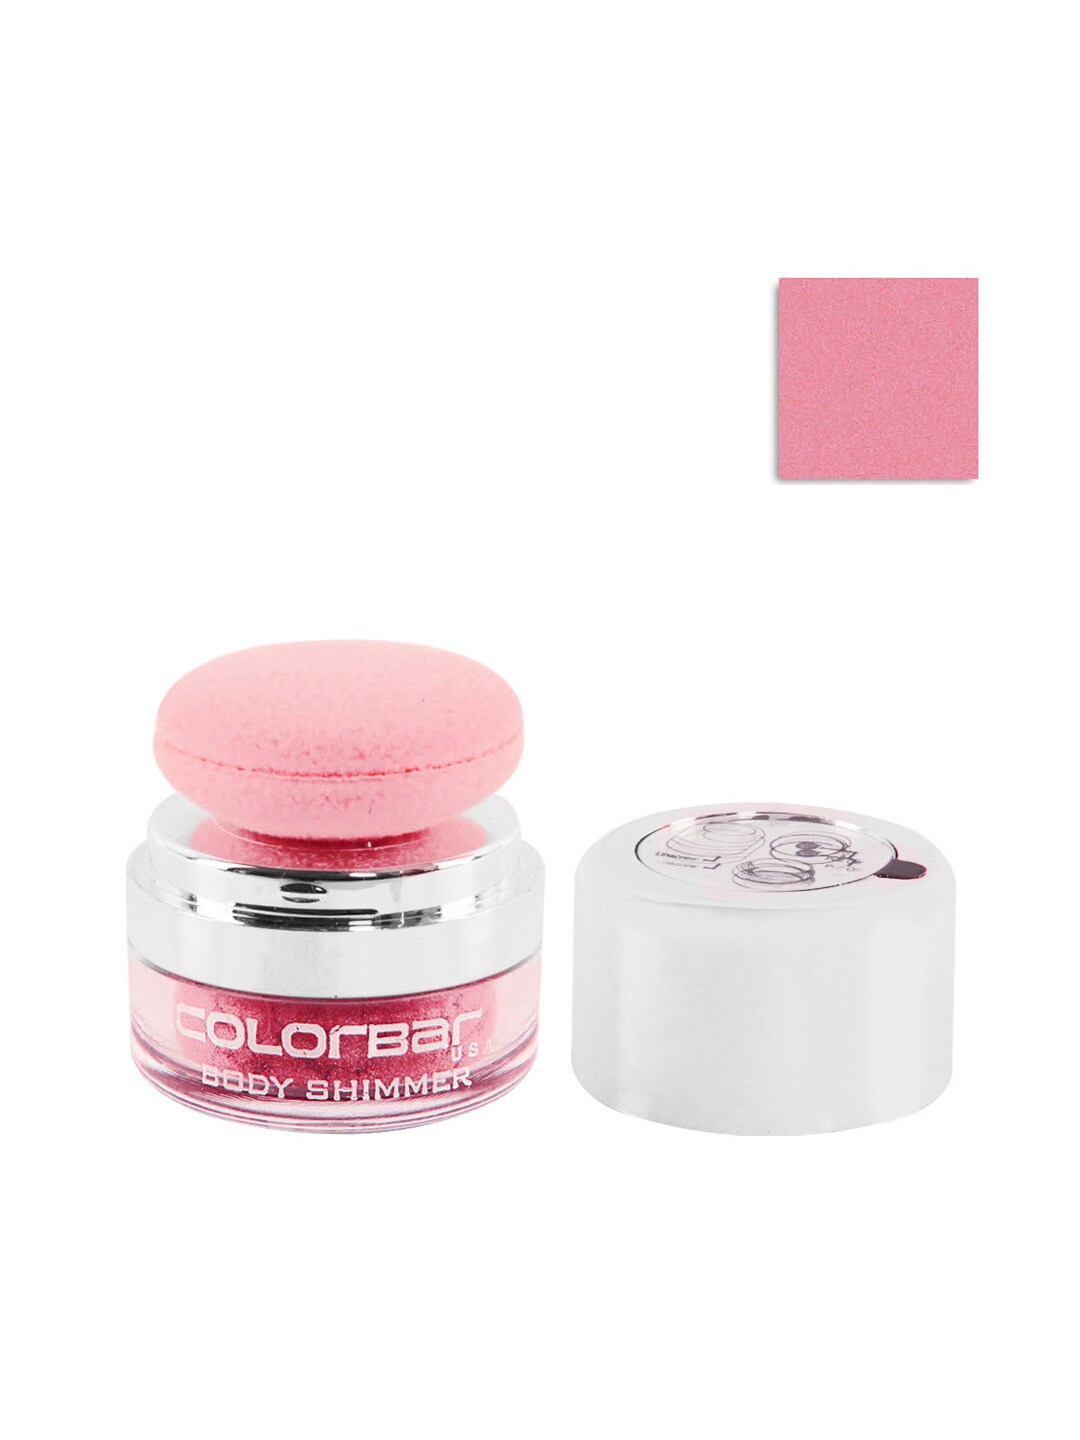 Colorbar Touch And Blushe Tint of Pink Blusher 001